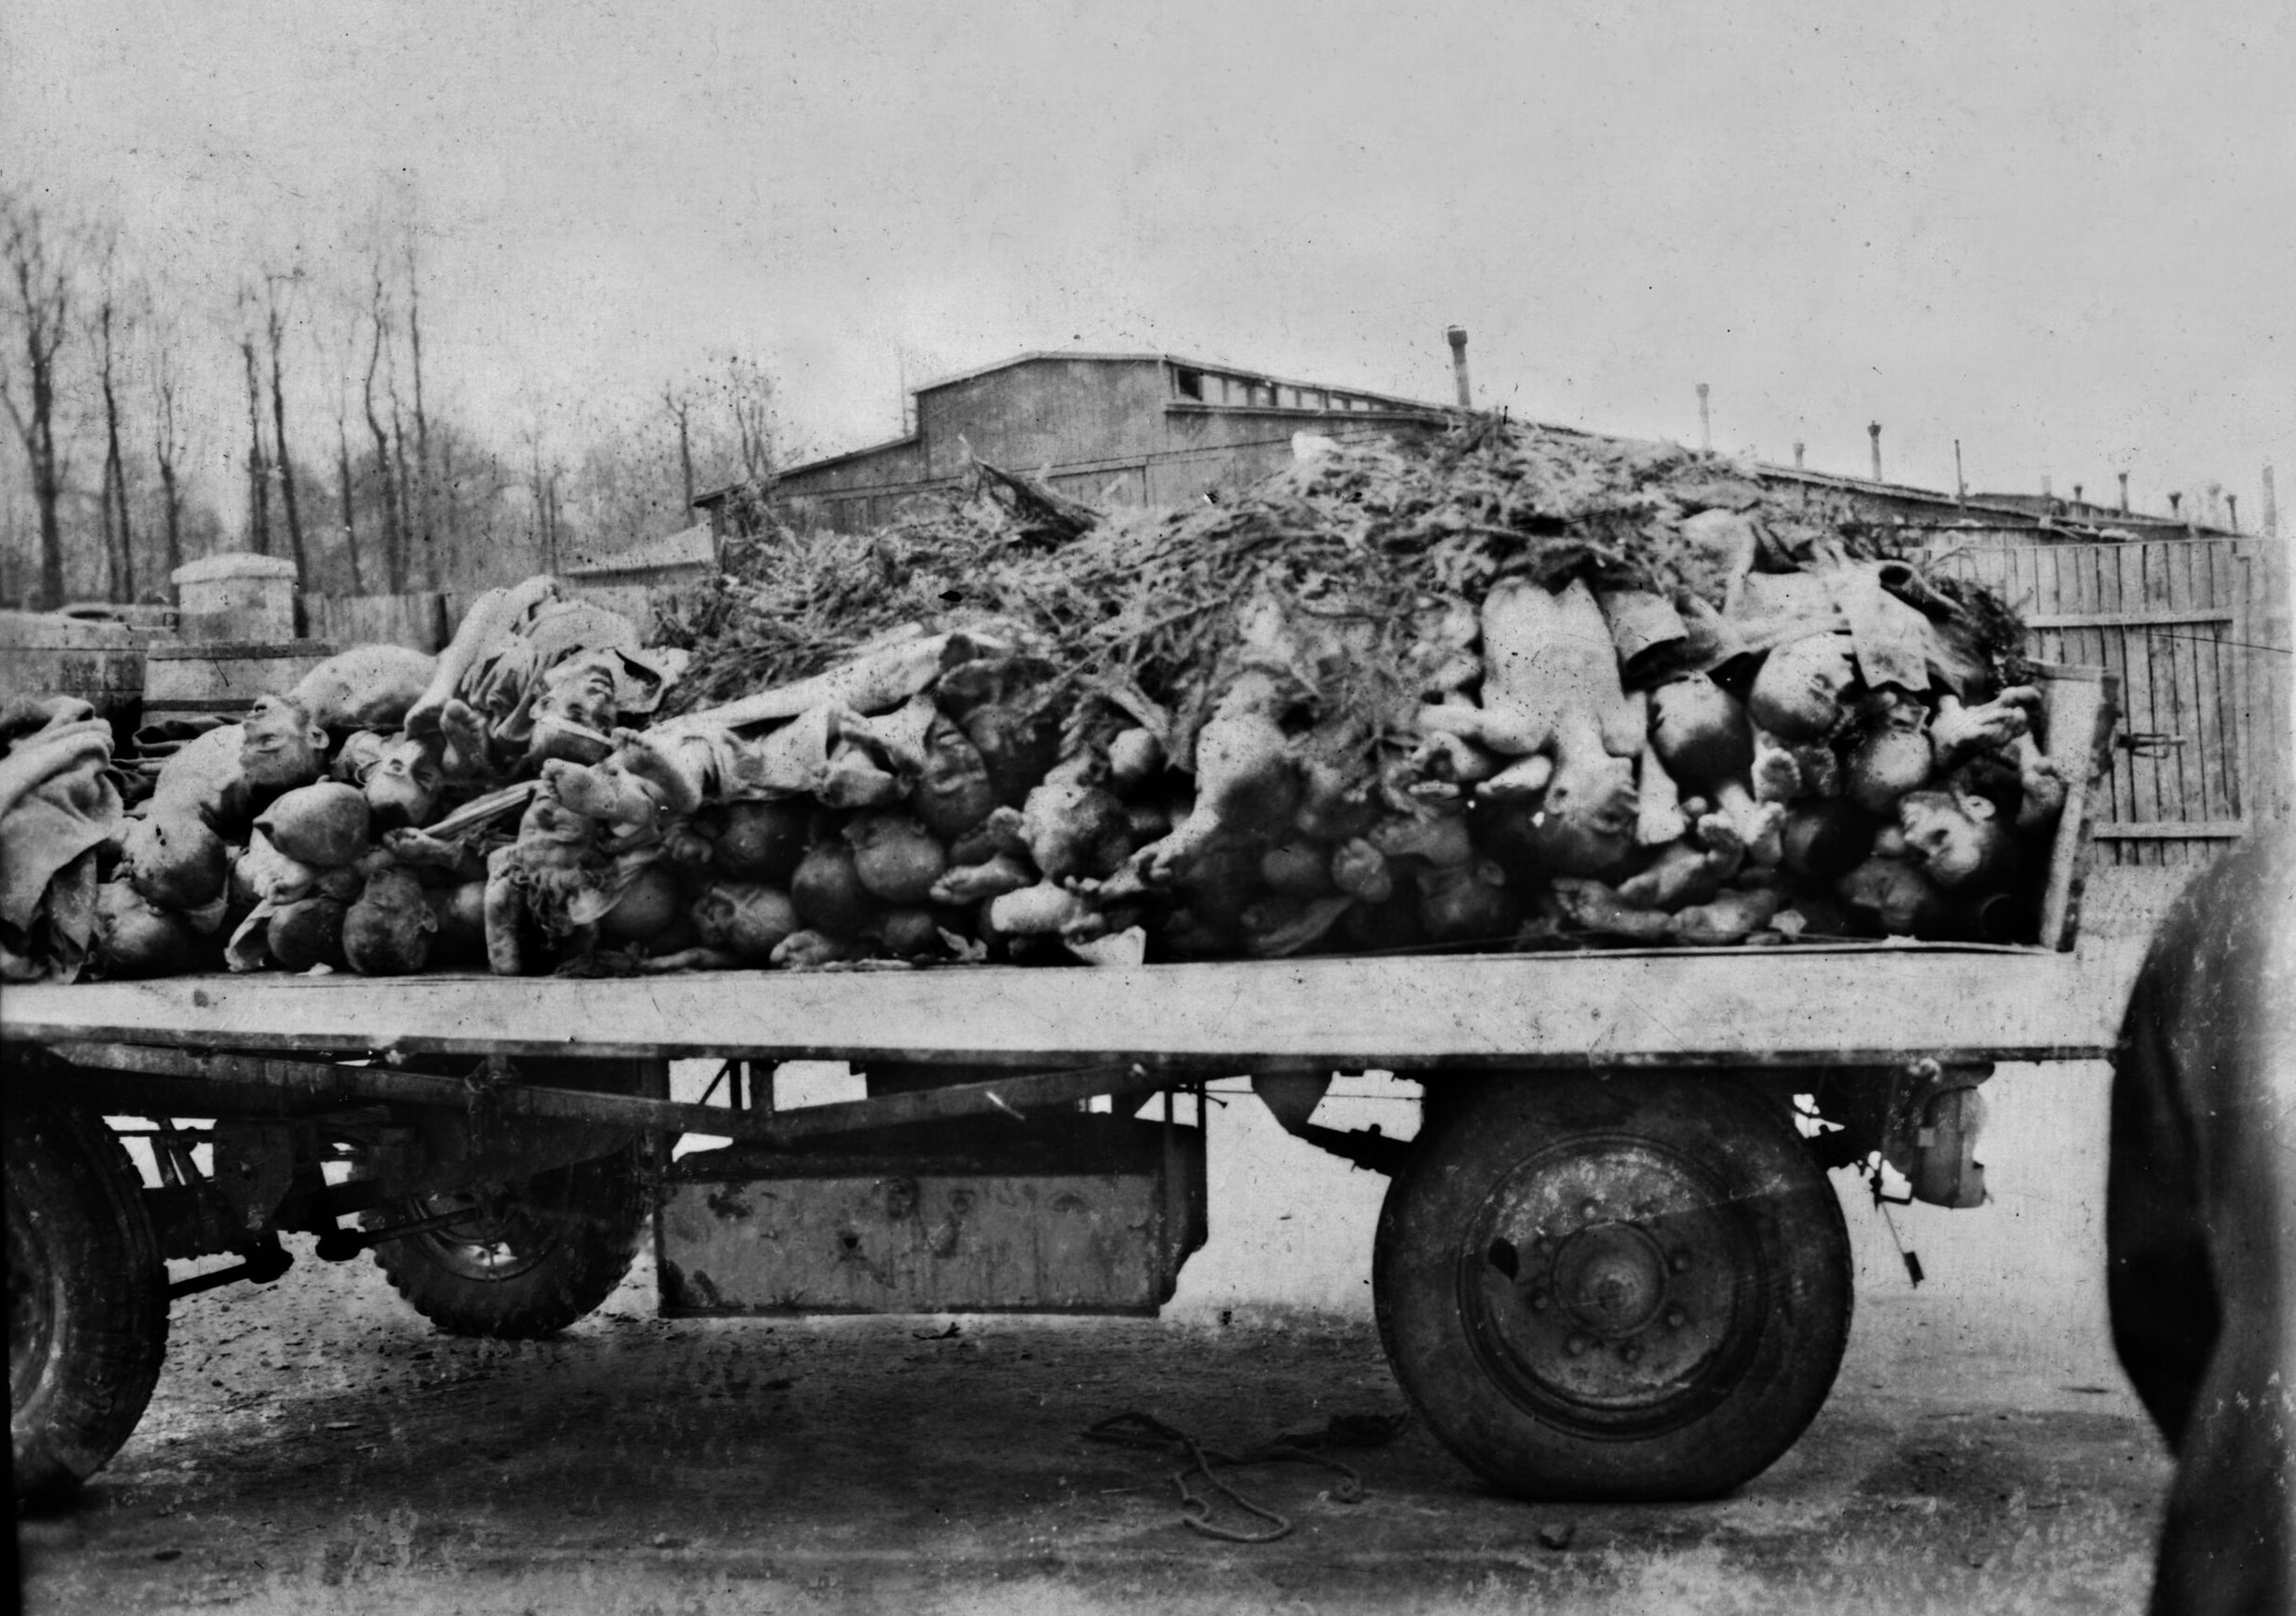 Piles of emaciated corpses were left at Buchenwald as silent witnesses to the Nazis’ brutal treatment of inmates.